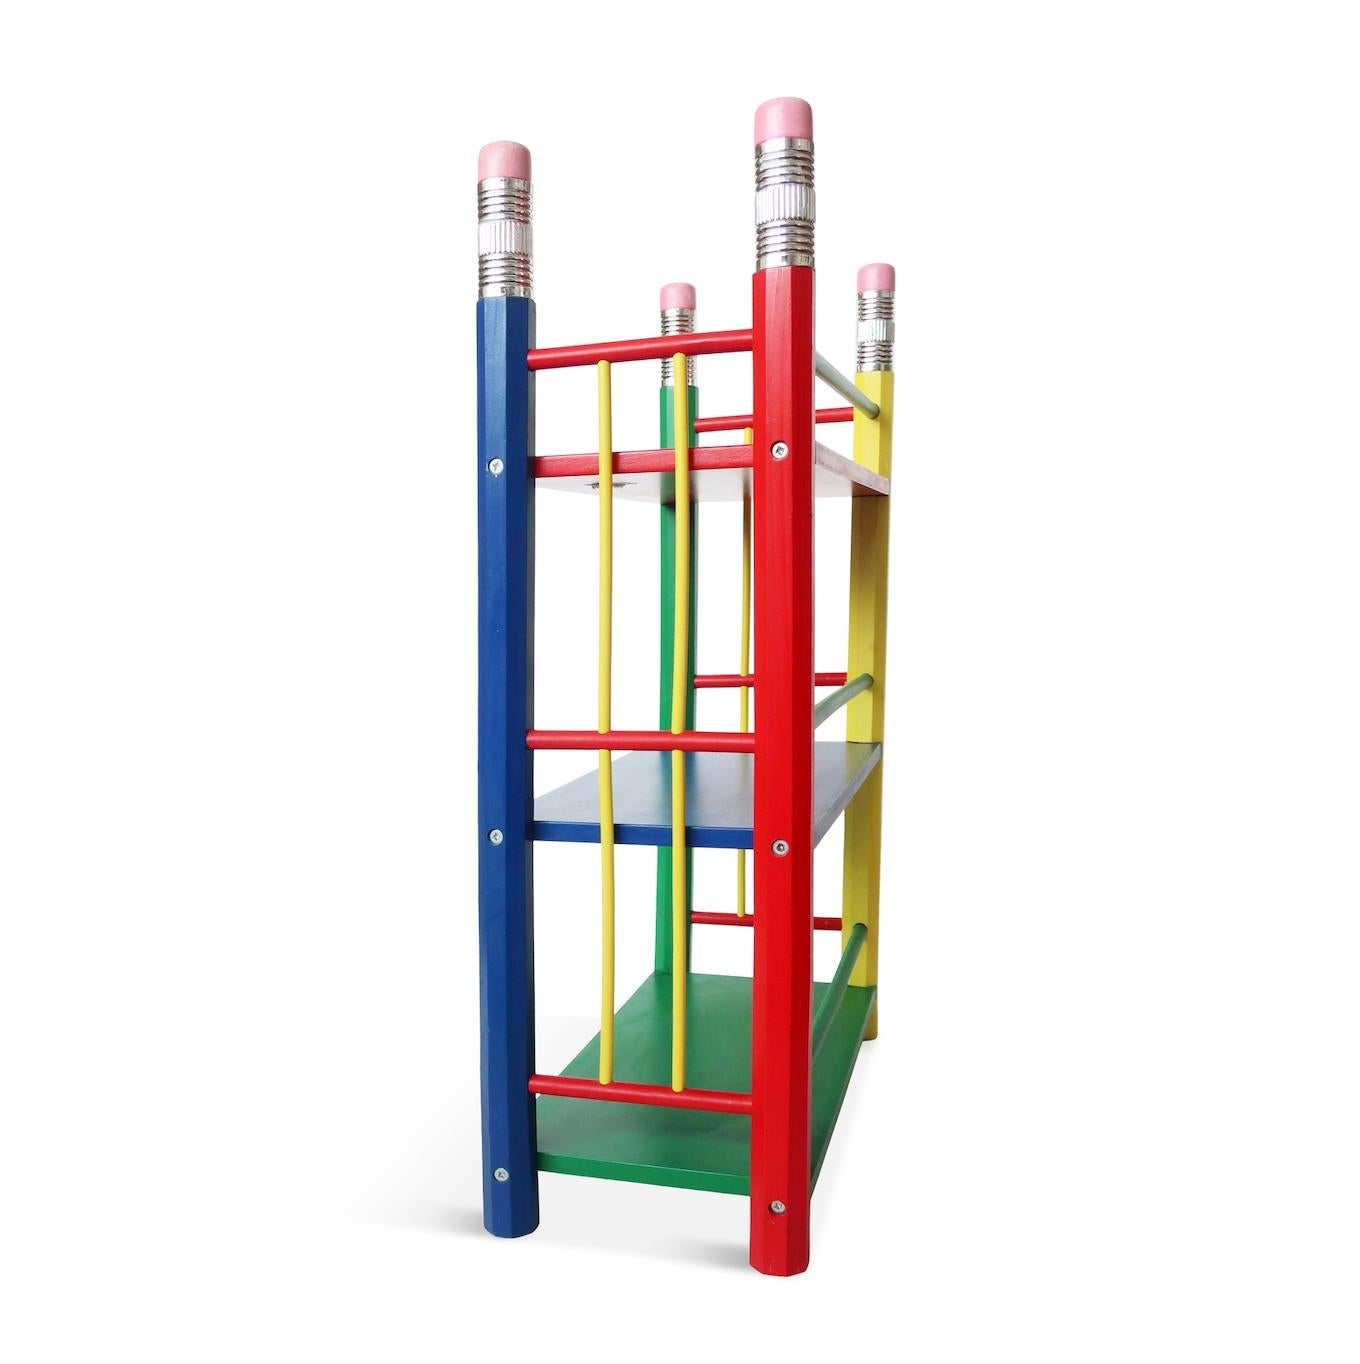 A great postmodern bookshelf from Pierre Sala's pencil-themed furniture from the 1980s for Pierre Sala Furniture. Its strikingly primary colored design is composed of three shelves (one blue, one green, and one red) supported by four pencils in red,